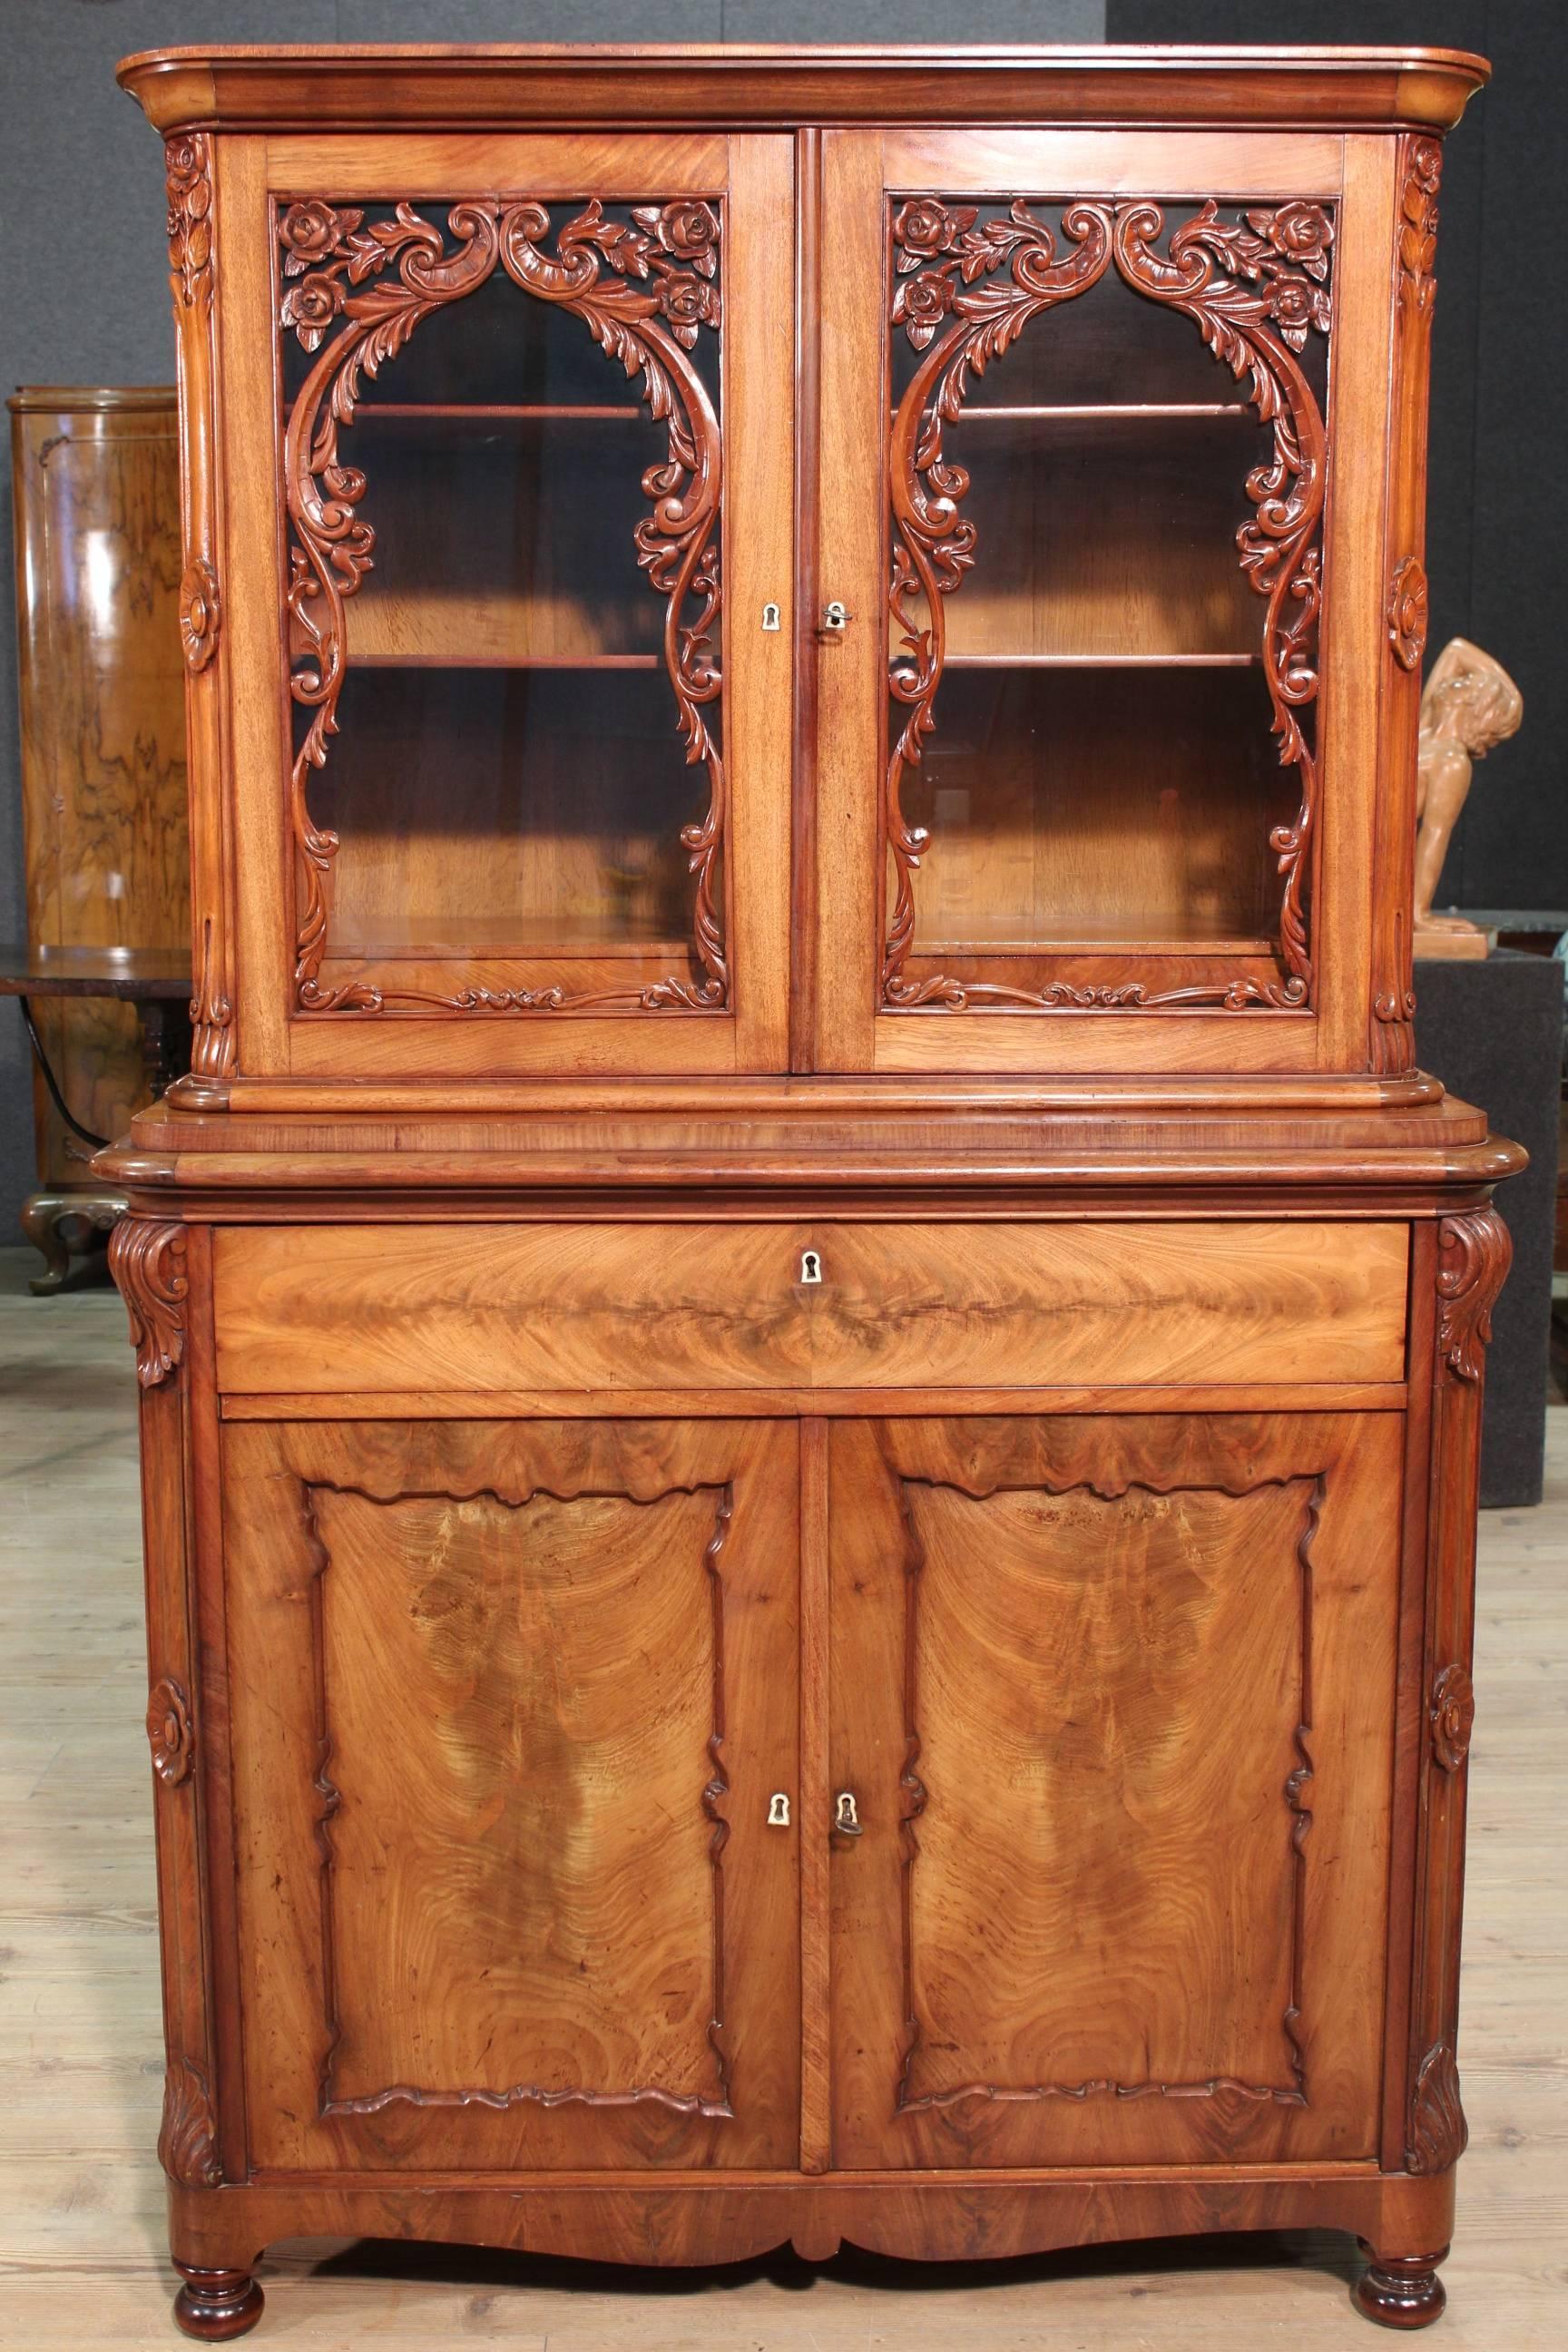 Dutch showcase of the second half of the 19th century. Double body library made by carved mahogany and mahogany feather of beautiful line and tasteful decoration. Cupboard of great service complete with two working keys. In good condition with some